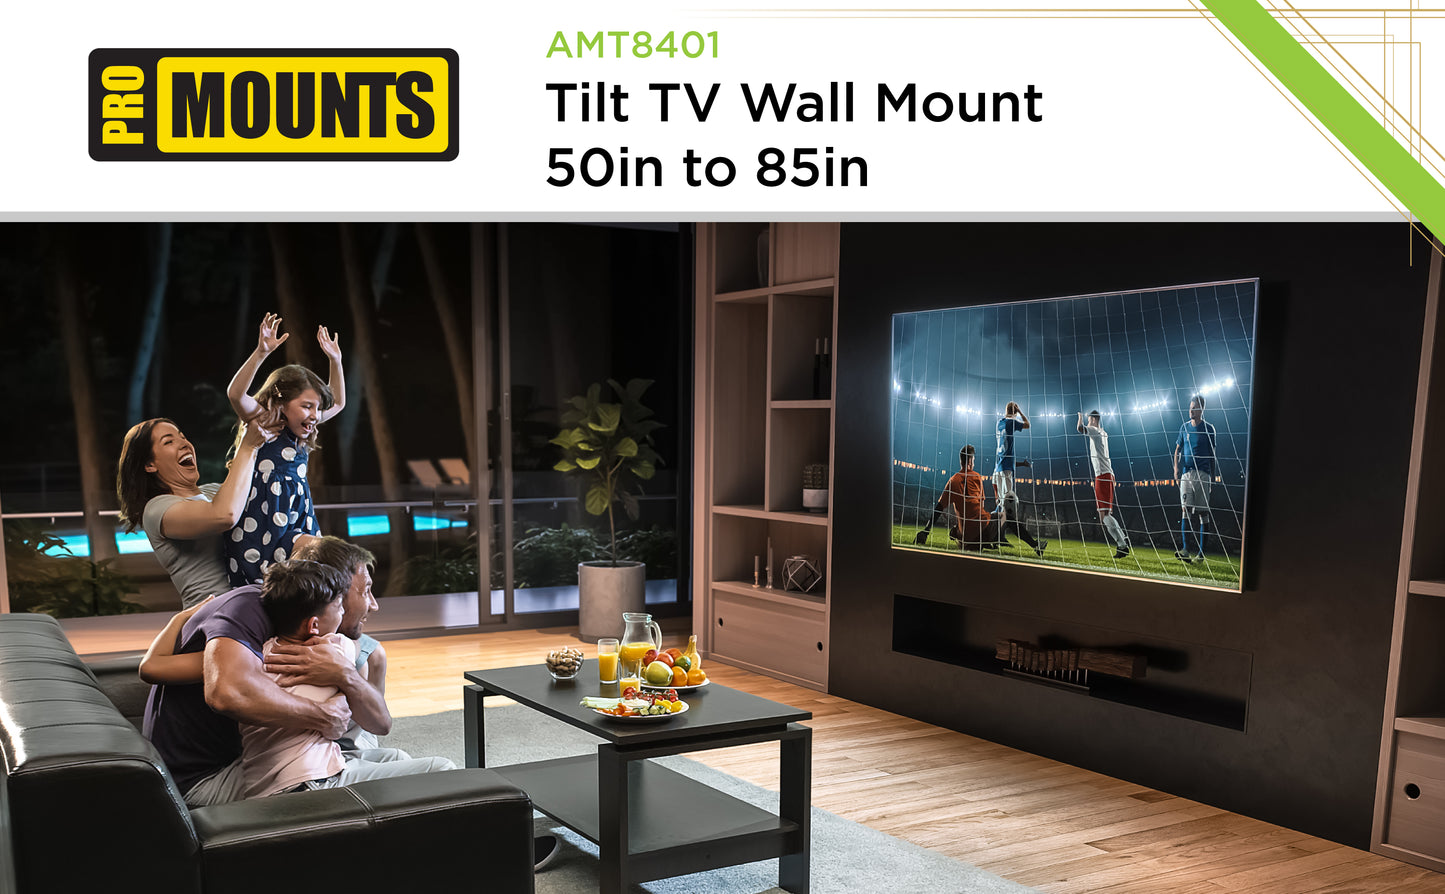 ProMounts Tilting TV Mount for 50" to 85" TVs Holds up to 99Ibs (AMT8401)